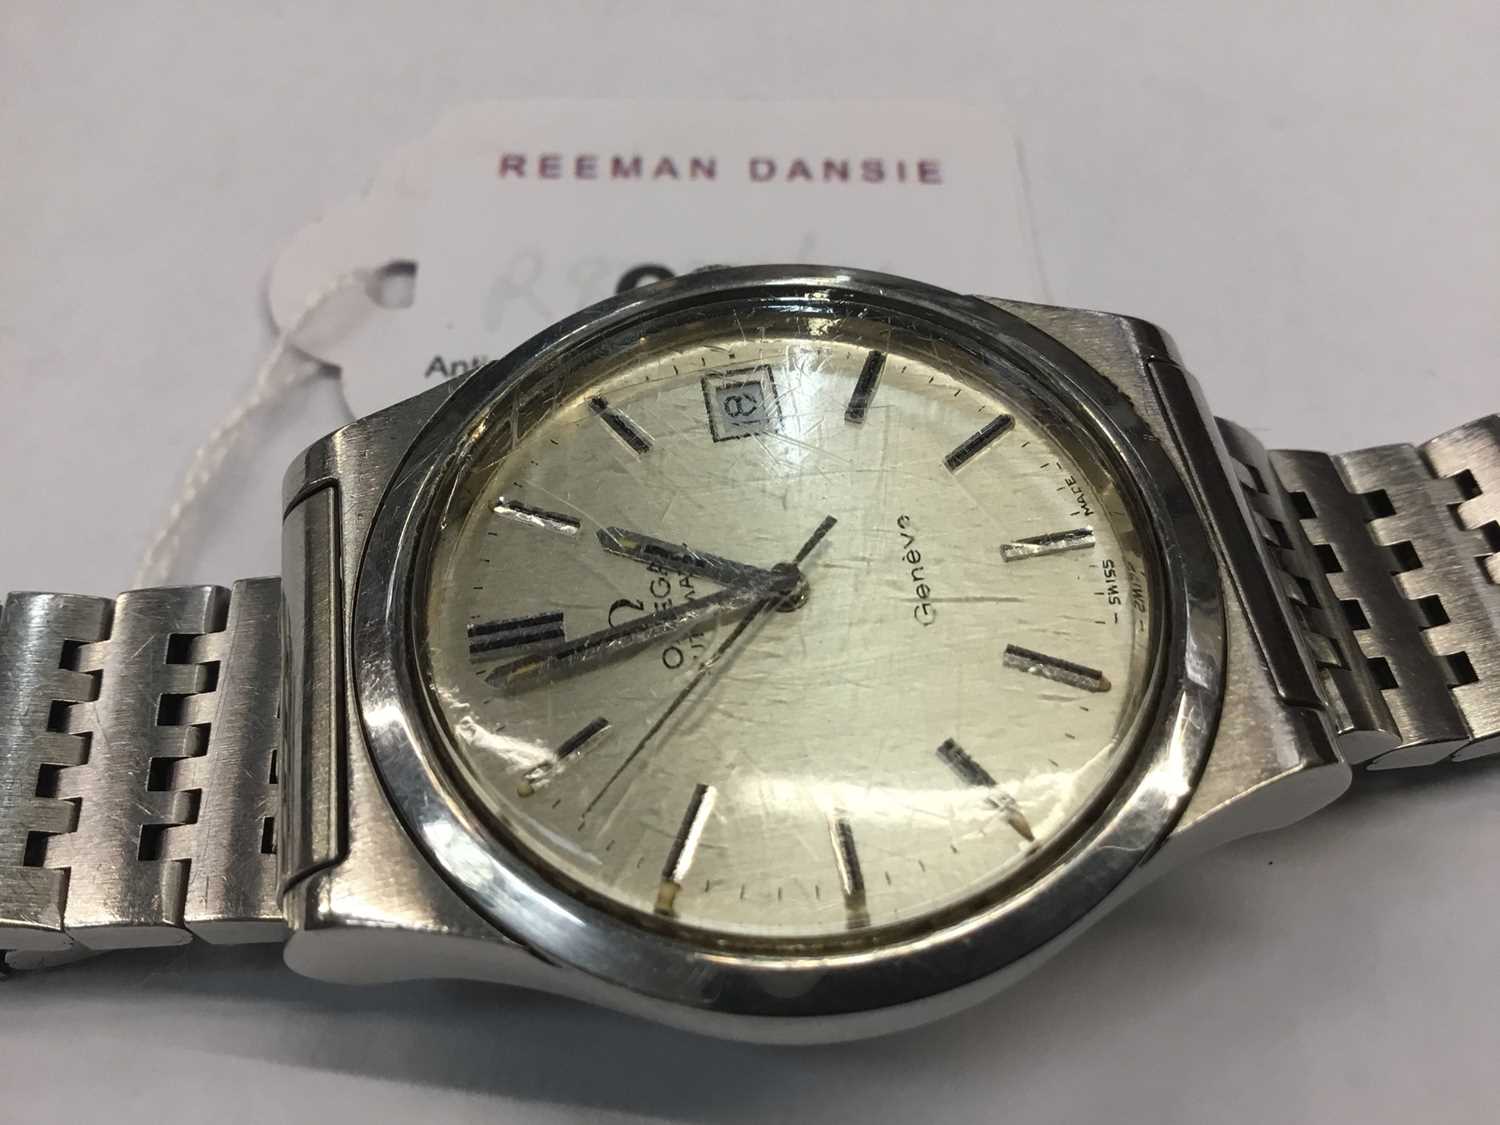 1970s Gentlemen's Omega Genève stainless steel wristwatch in box with original guarantee dated 1976 - Image 6 of 6